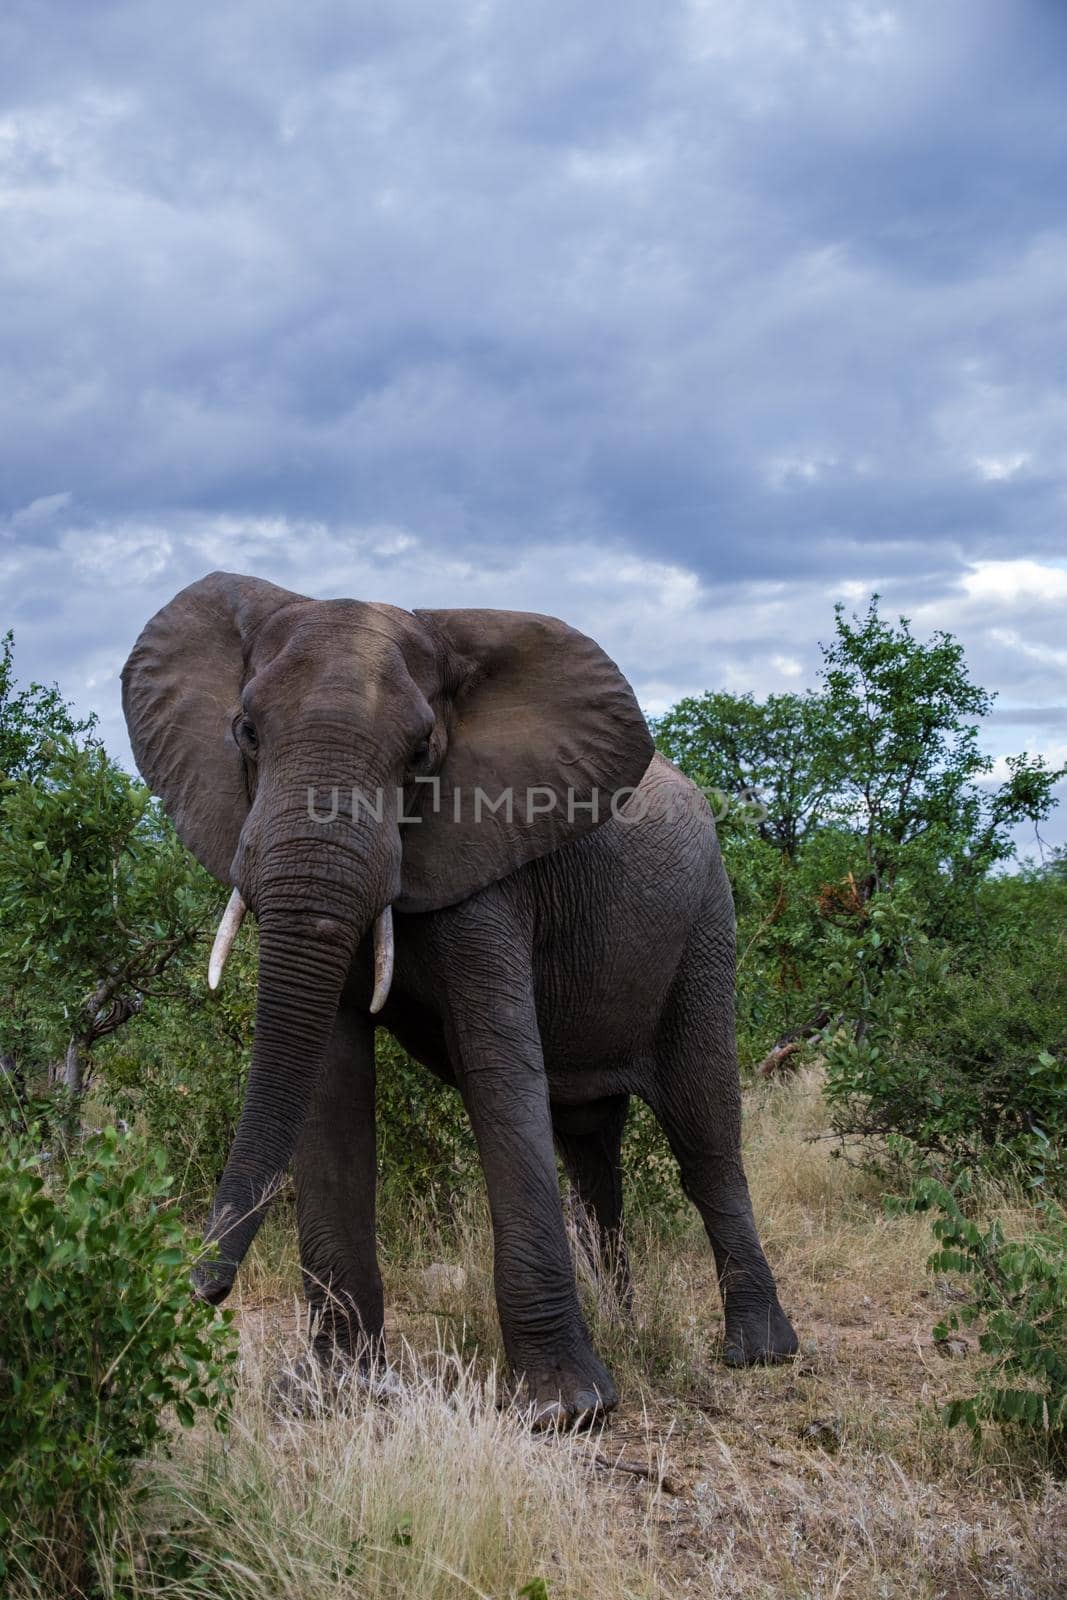 African Elephant in The Klaserie Private Nature Reserve part of the Kruger national park in South Africa, African Elephants in the wild bus by fokkebok